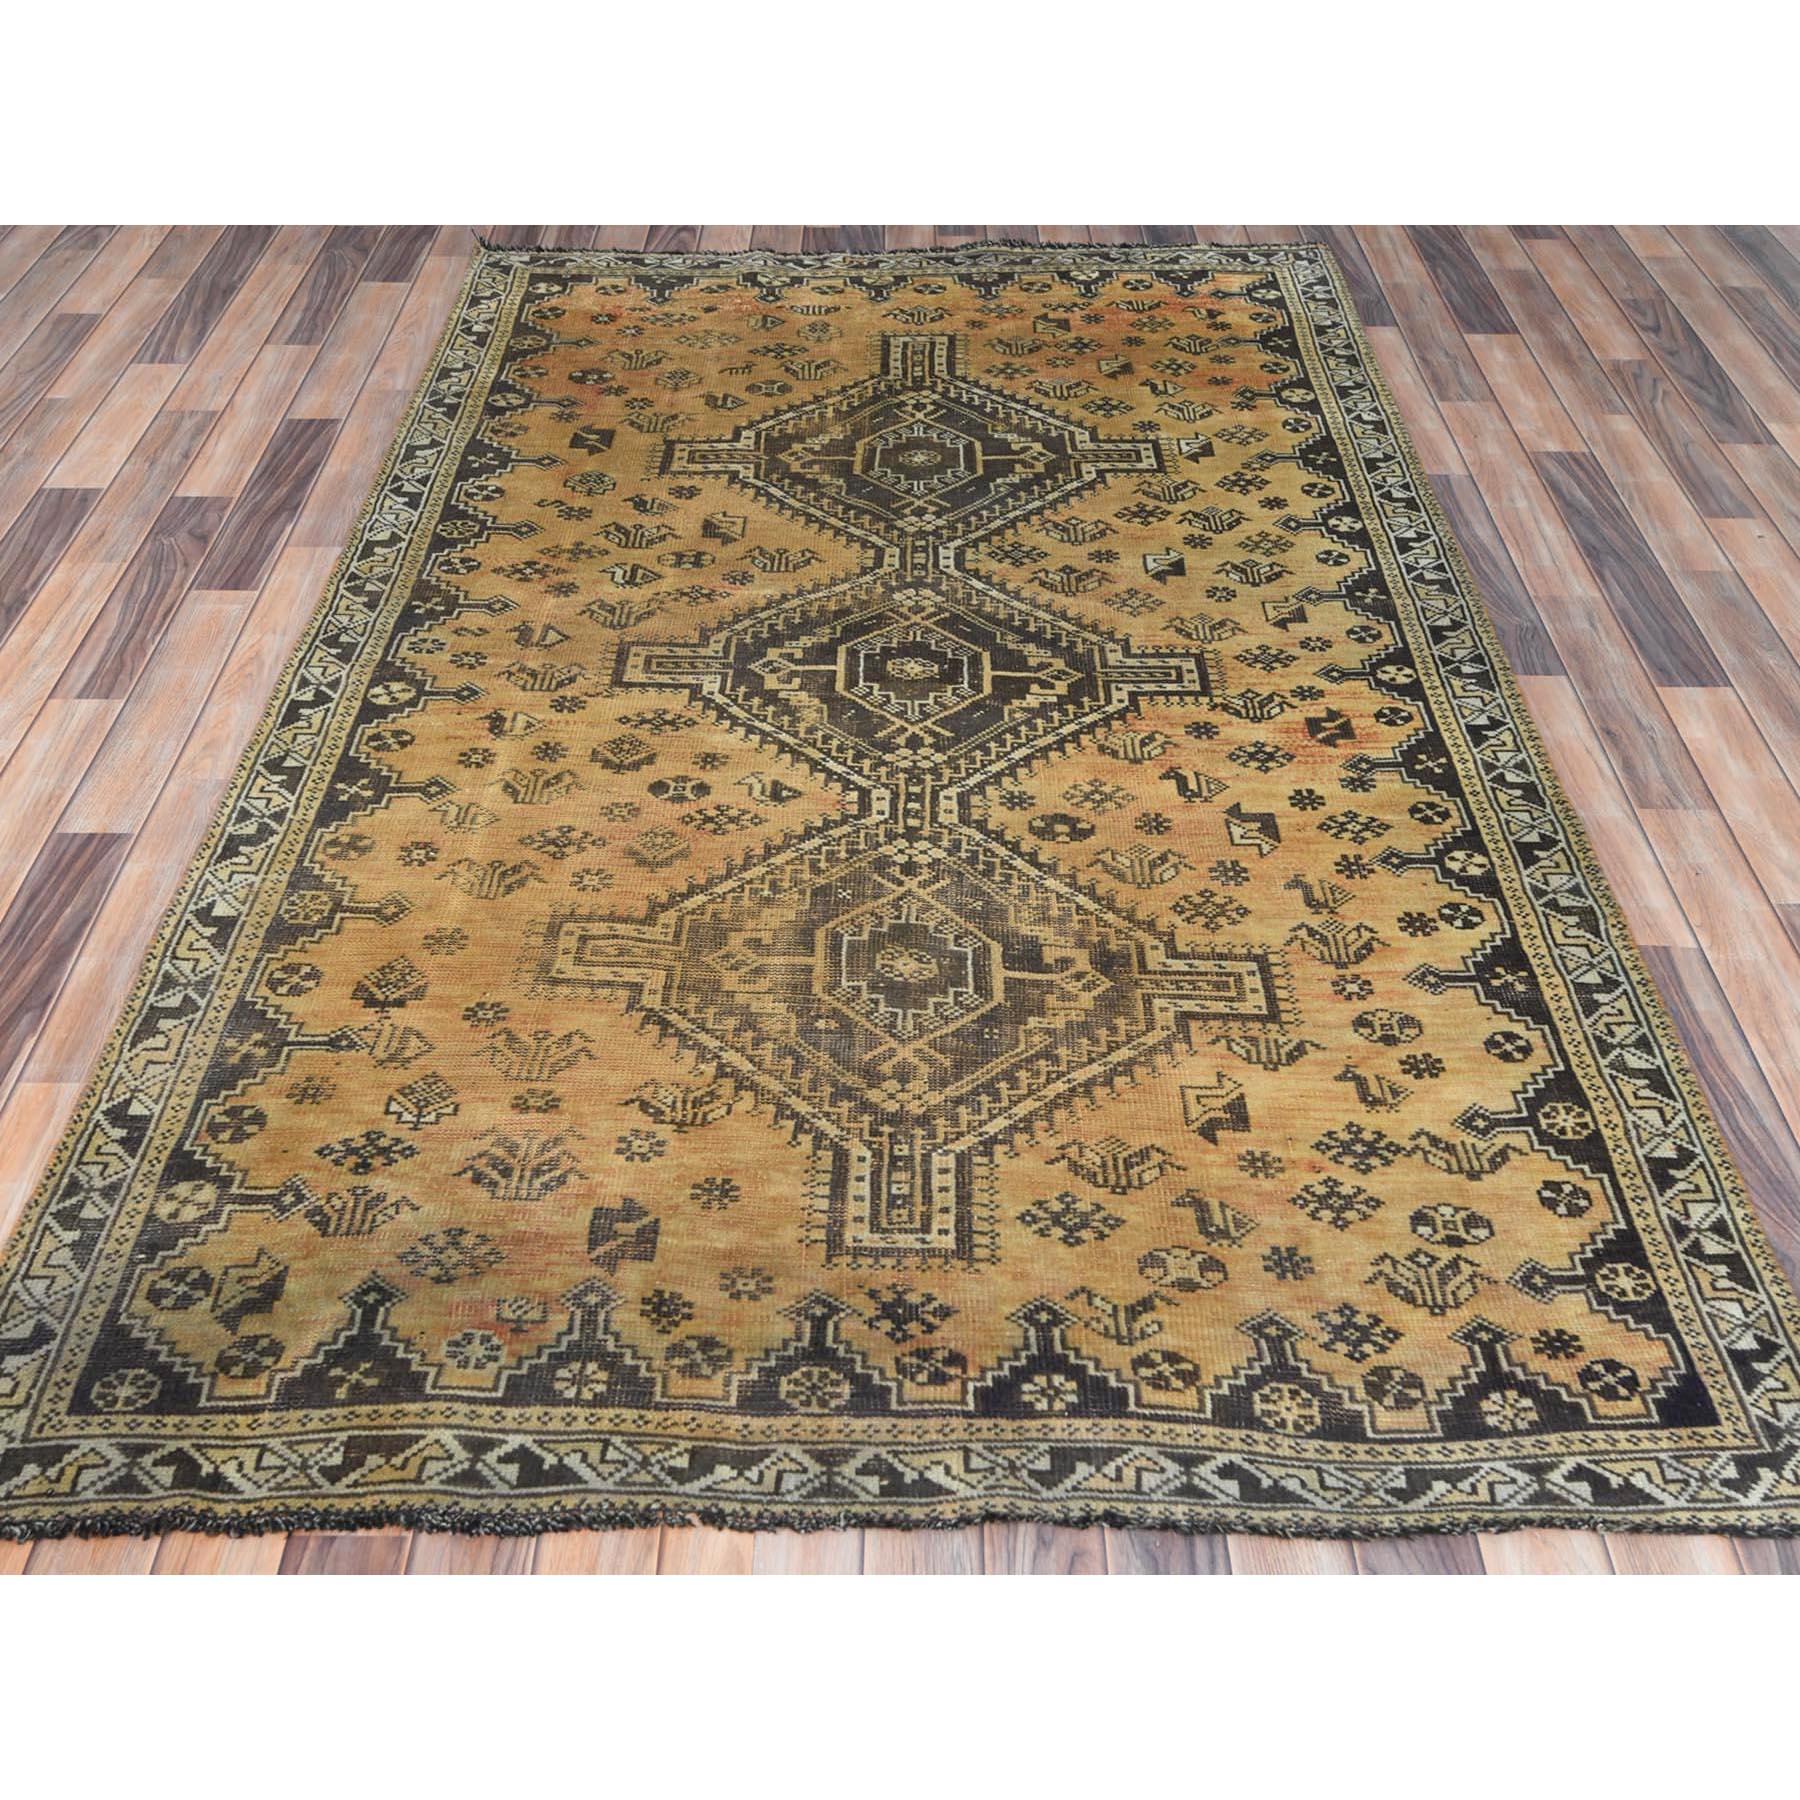 This fabulous Hand-Knotted carpet has been created and designed for extra strength and durability. This rug has been handcrafted for weeks in the traditional method that is used to make
Exact Rug Size in Feet and Inches : 5'1